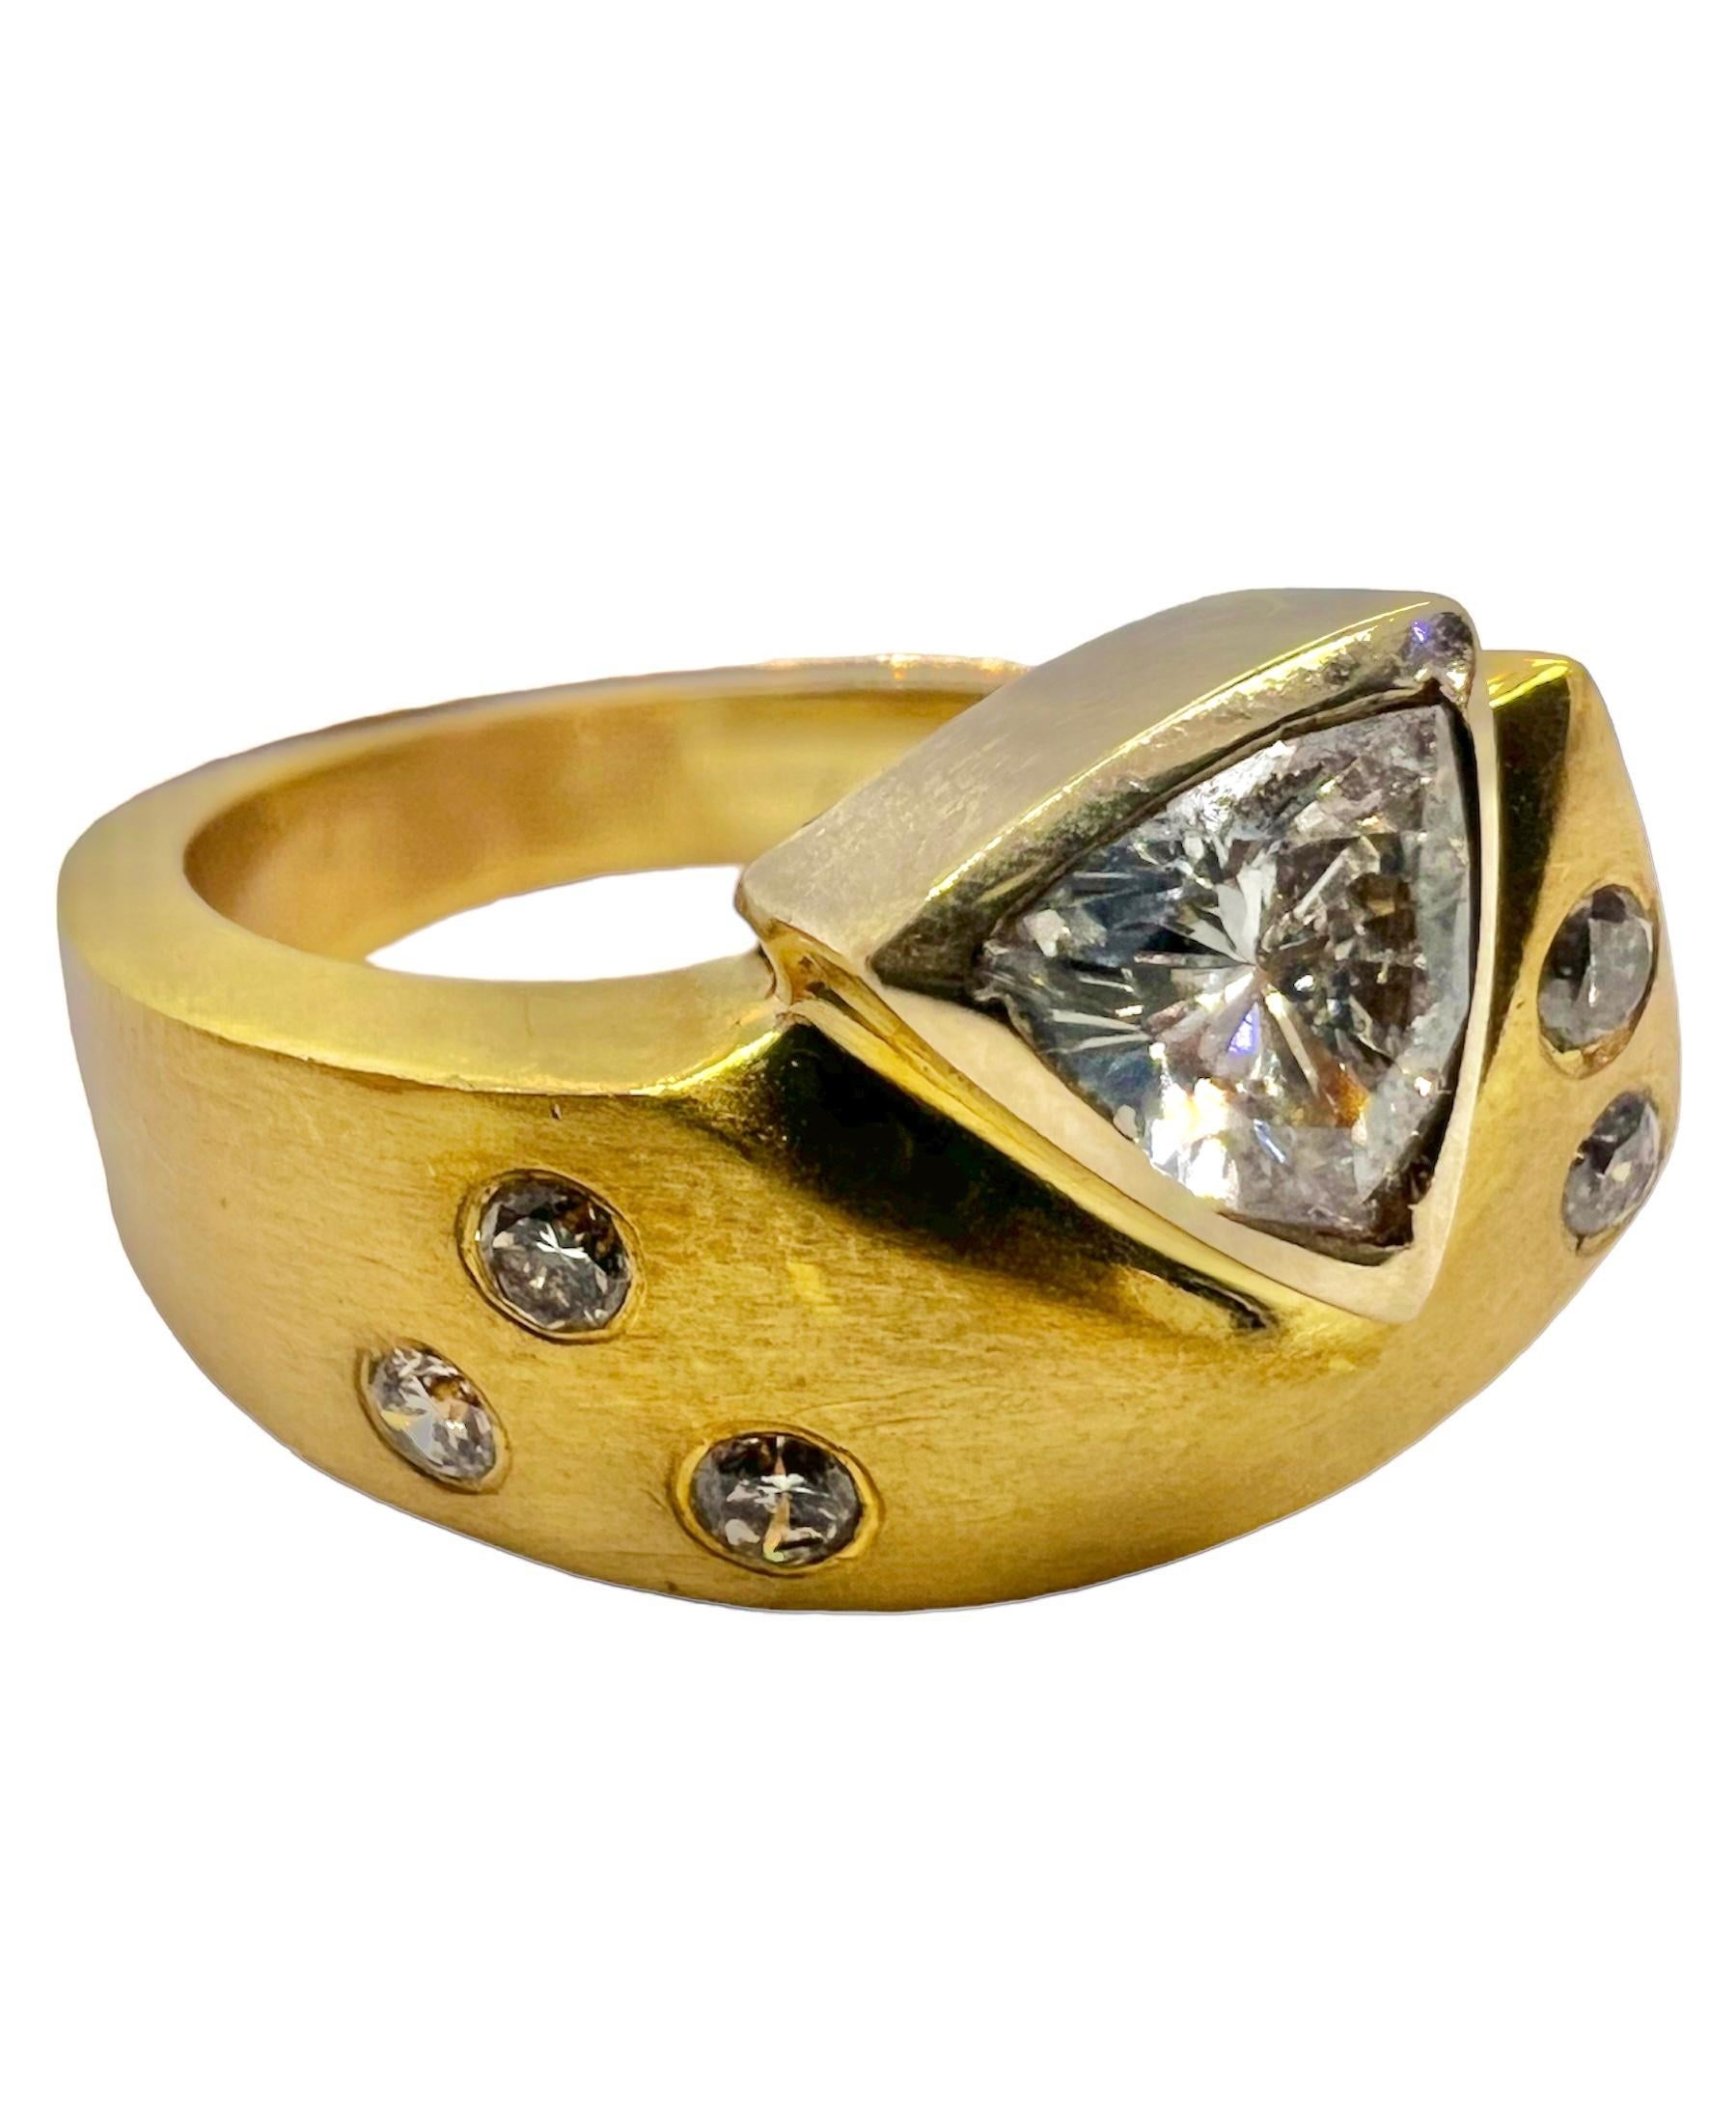 18K yellow gold ring with trillion cut center diamond and accentuated with small round diamonds.

Sophia D by Joseph Dardashti LTD has been known worldwide for 35 years and are inspired by classic Art Deco design that merges with modern